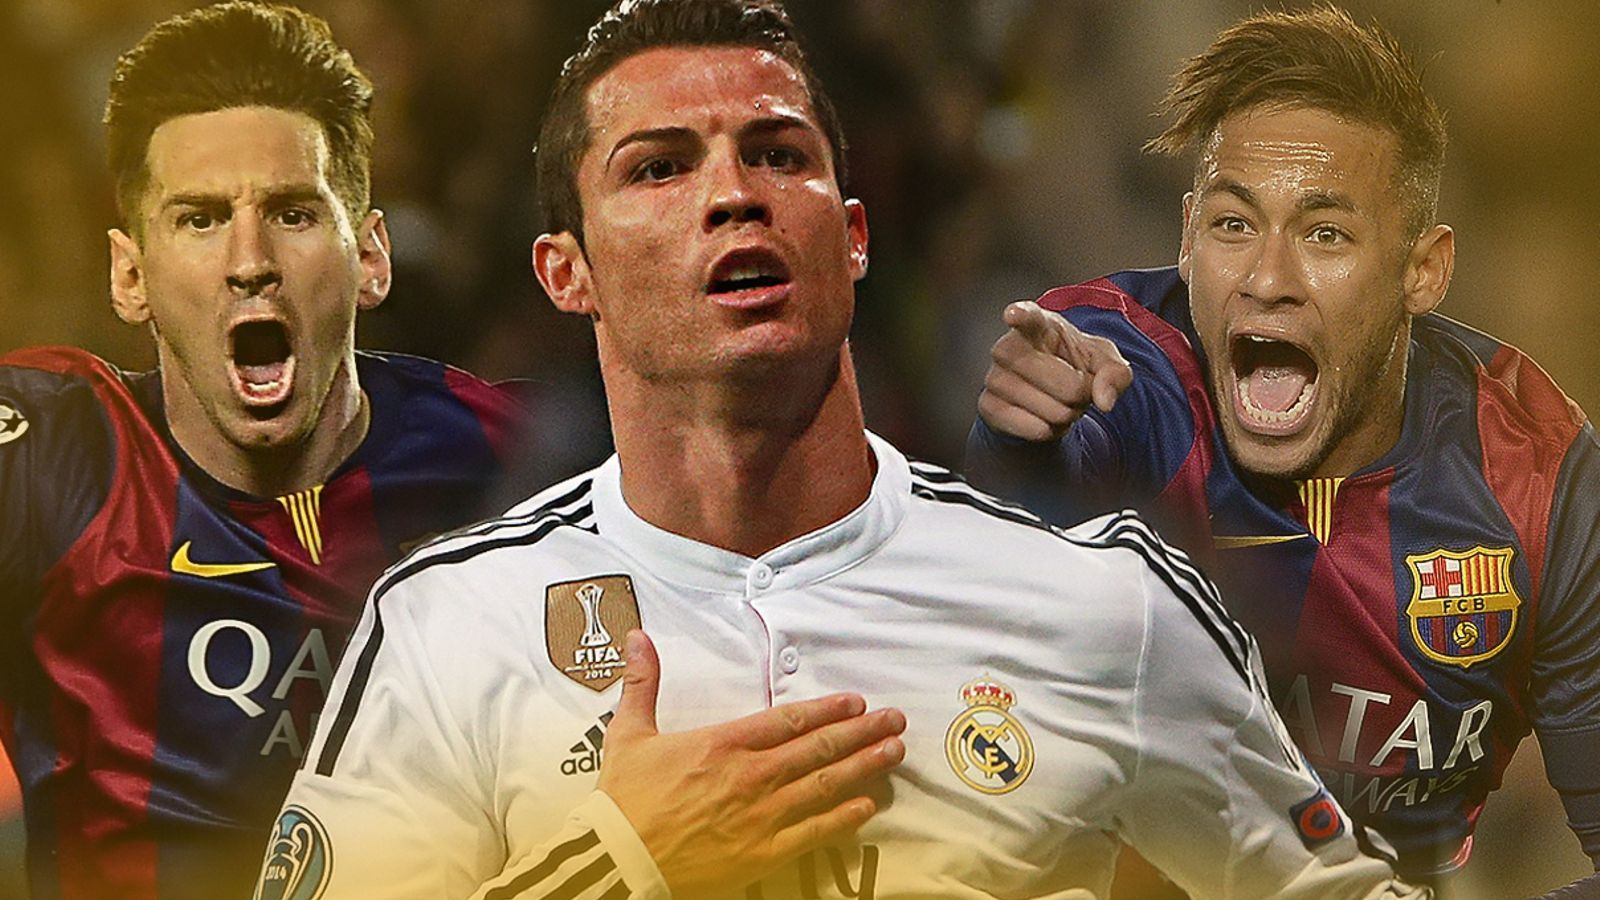 Lionel Messi, Cristiano Ronaldo And Neymar Have Been